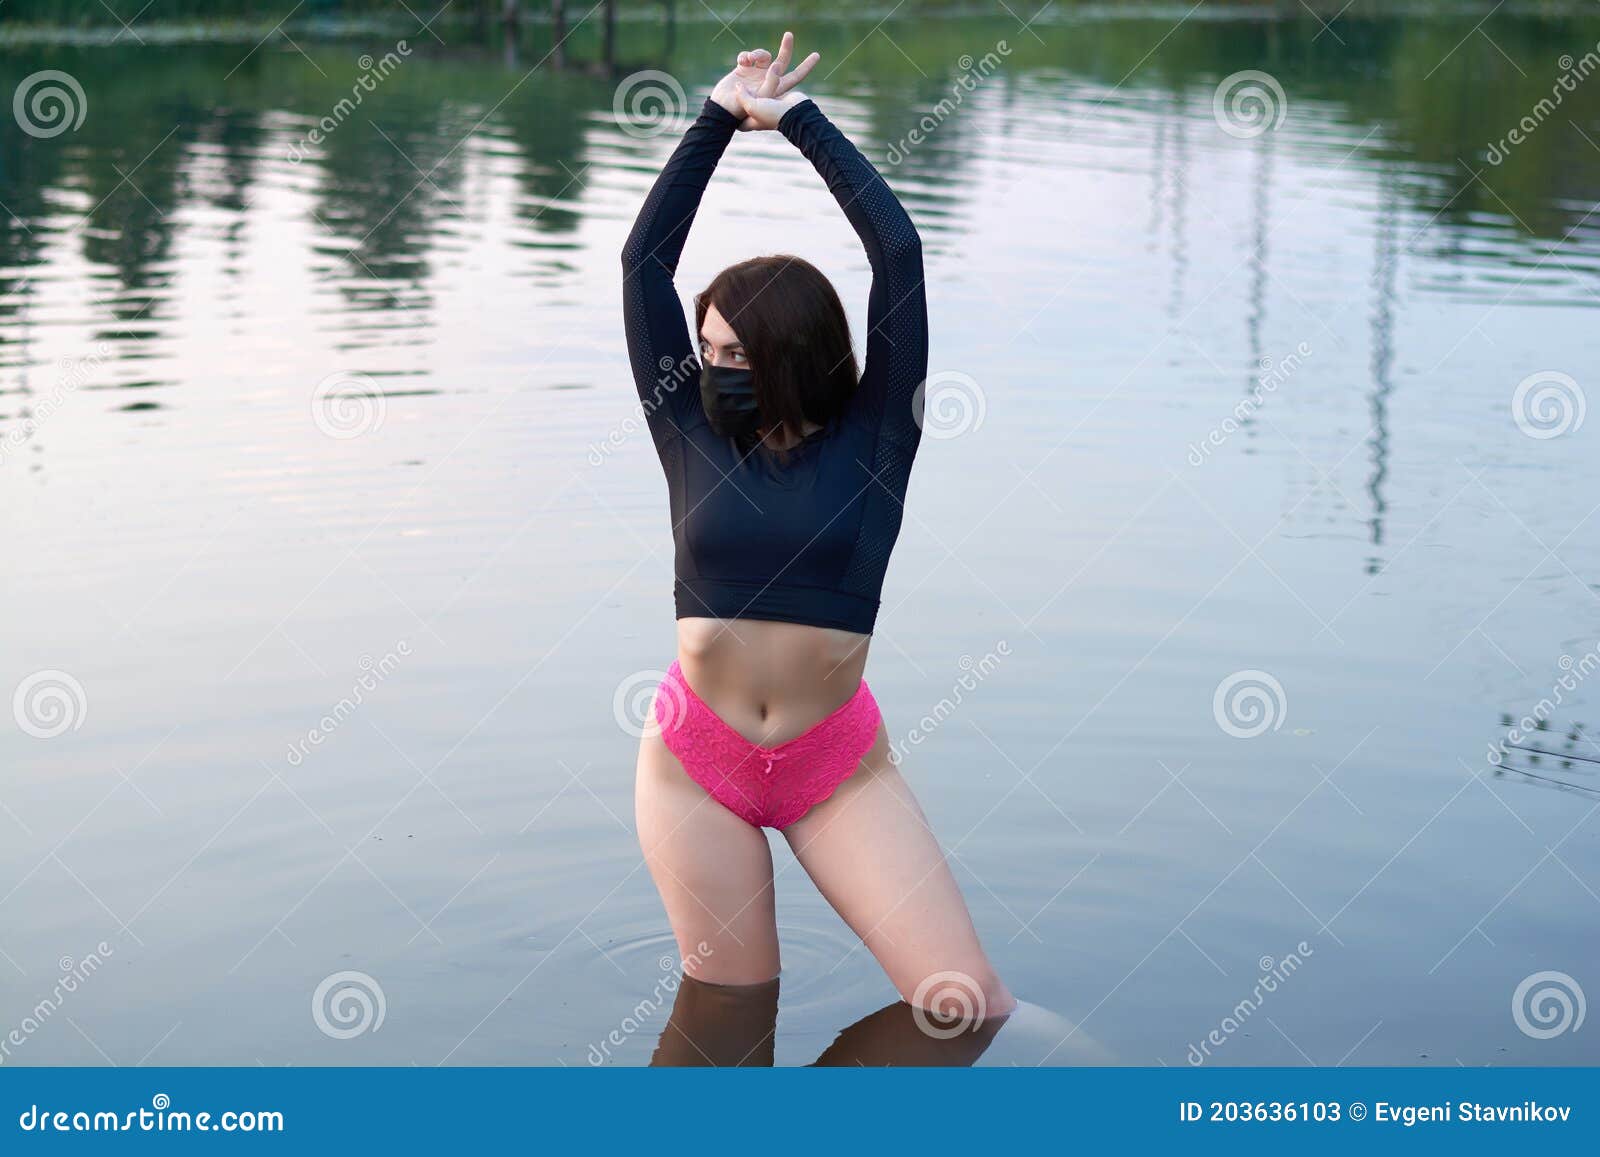 A Beautiful Woman In A Black Medical Mask Stands In The River Rest In The Pandemic Stock Image